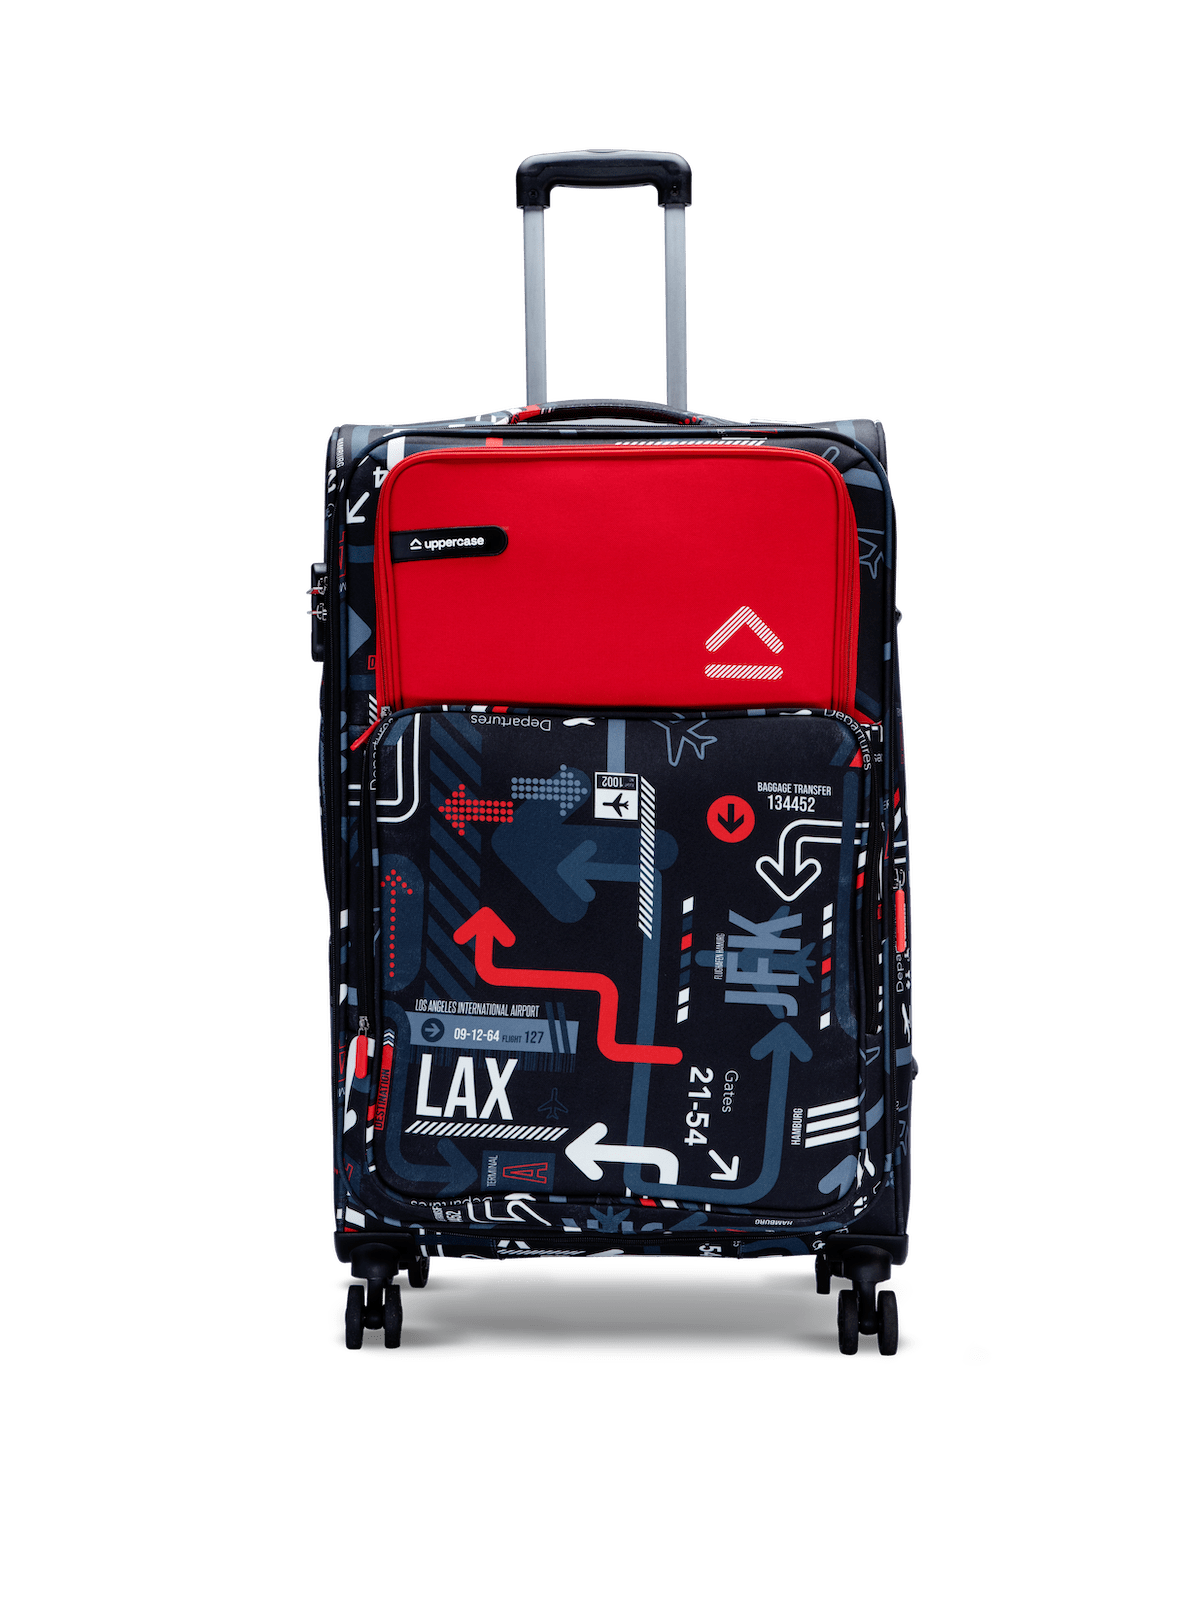 uppercase JFK (Large) 77cms | Check-in Trolley Bag for travel | Dust-Resistant Eco-Soft Polyester Printed Luggage | Sustainable 8 Wheel Suitcase for Men & Women |2500 Days Warranty (Red)